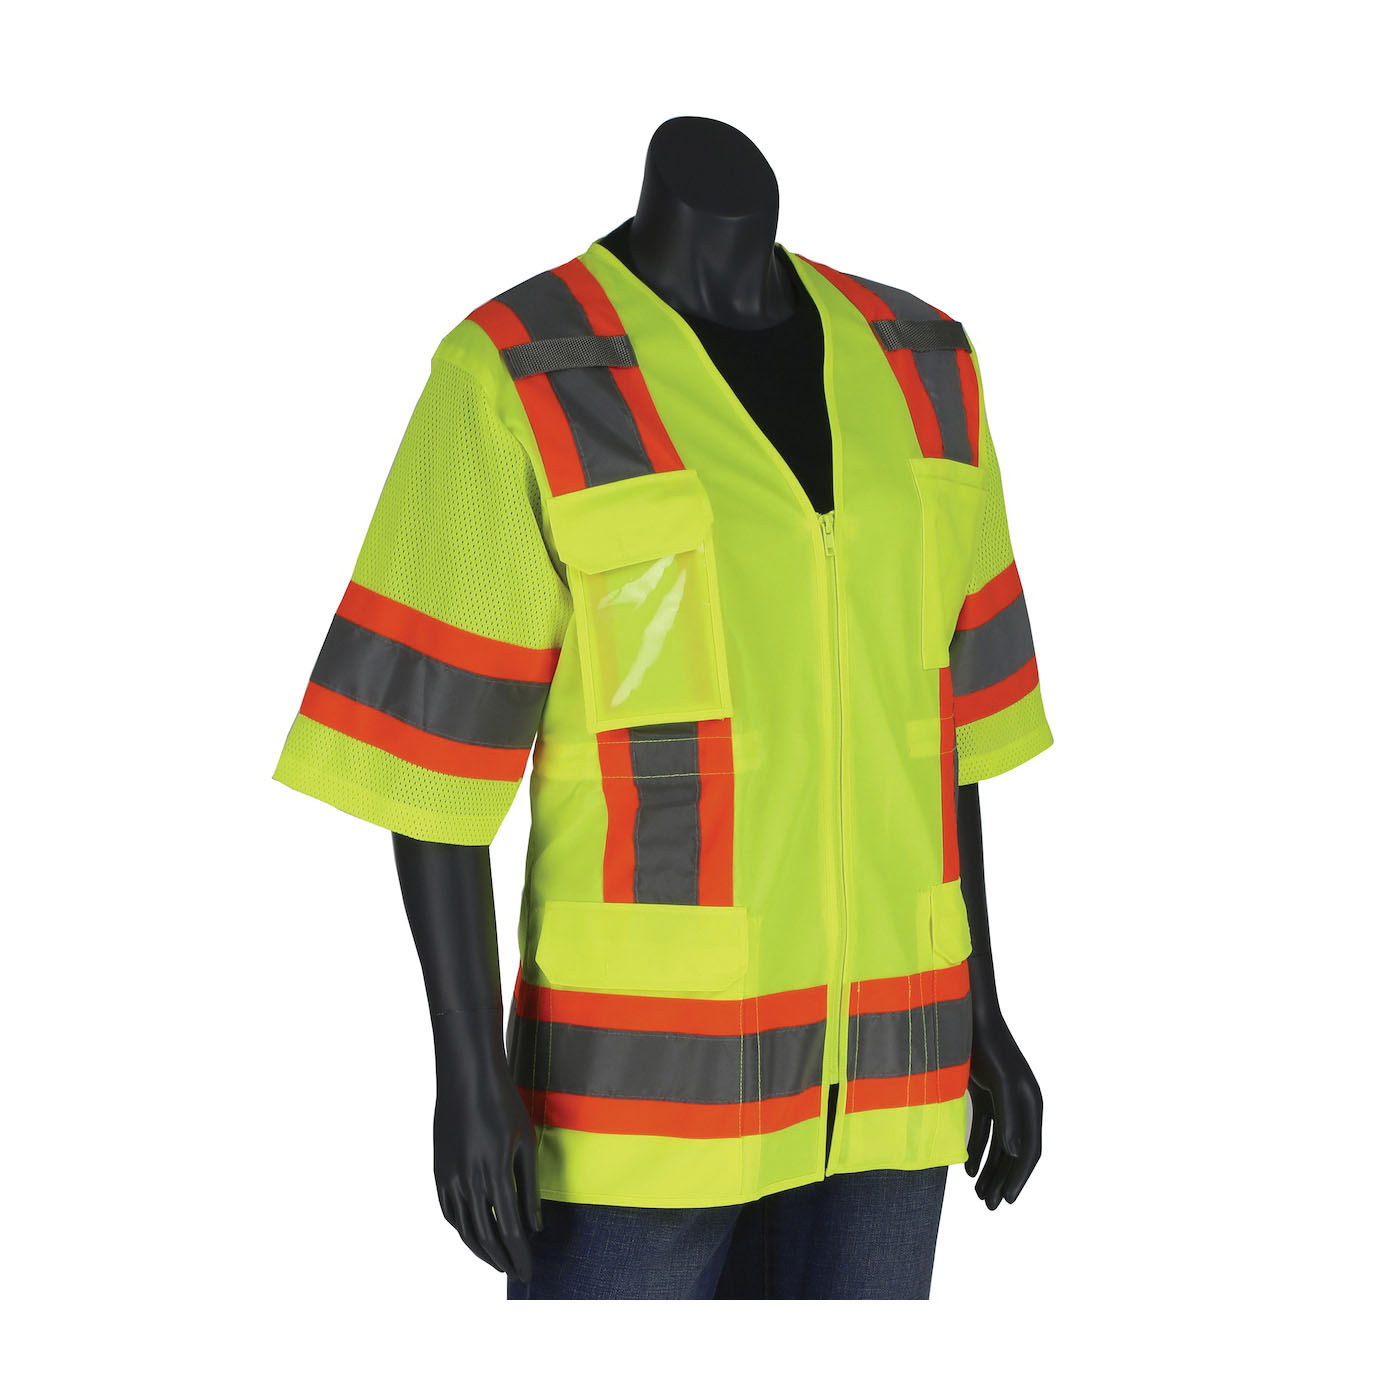 PIP® 303-0513-LY/S 2-Tone Contoured Surveyor's Vest With Solid Front and Mesh Back, S, Hi-Vis Yellow, 100% Polyester Mesh/Solid Tricot Knit, Zipper Closure, 11 Pockets, ANSI Class: Type/Class R3